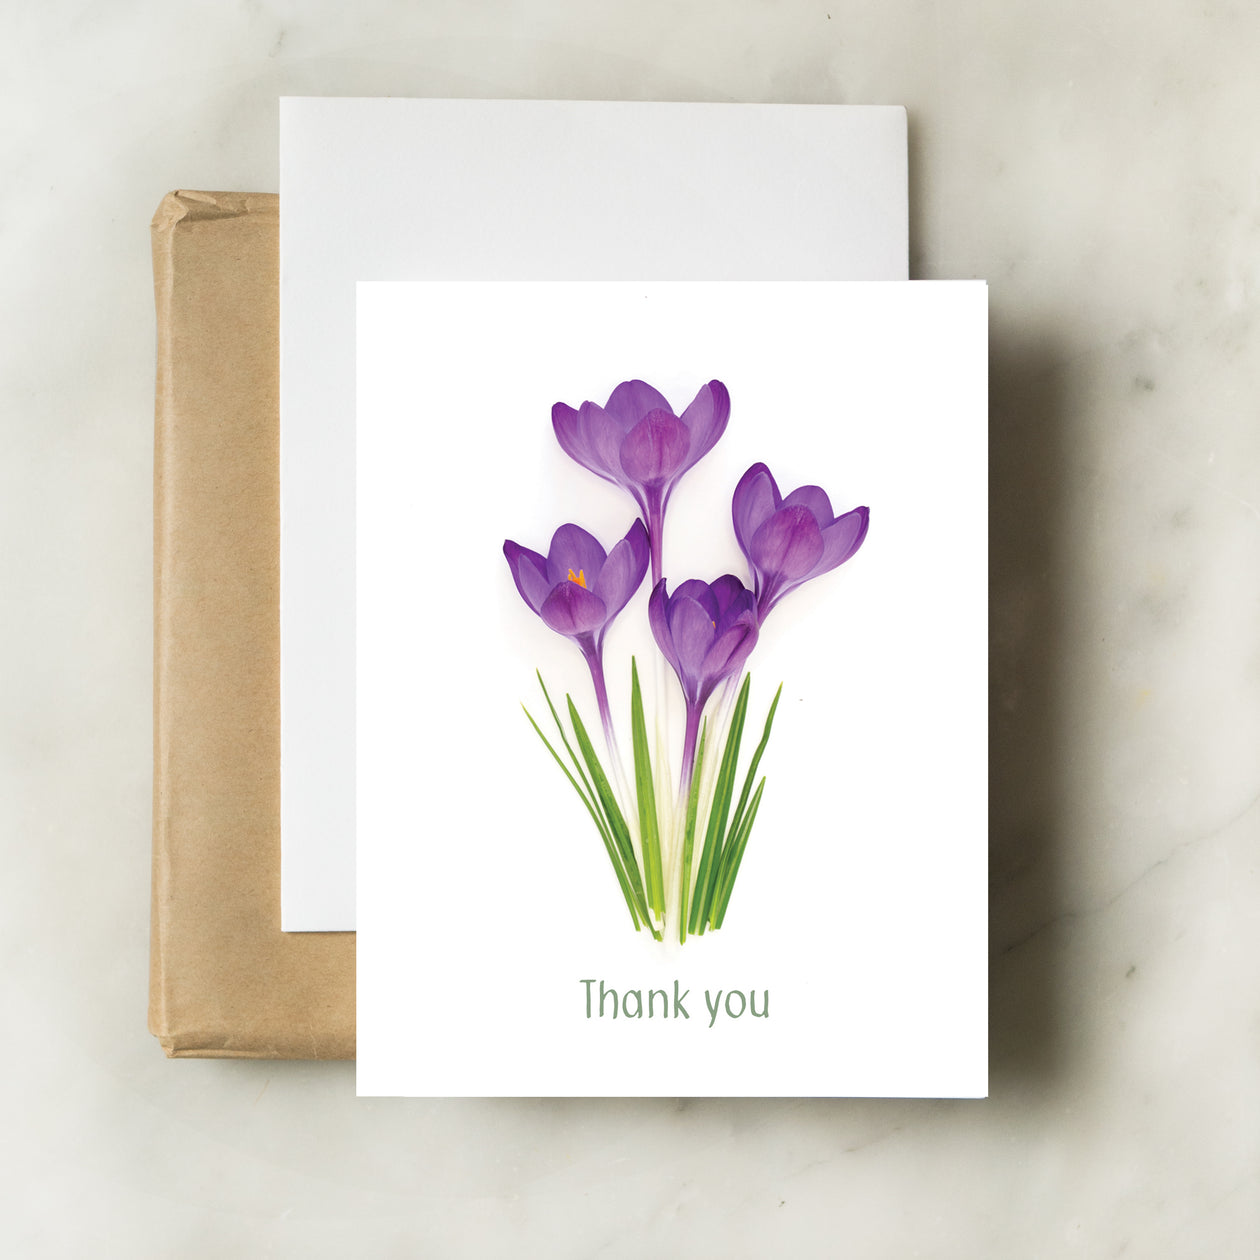 Thank you card with crocus flowers